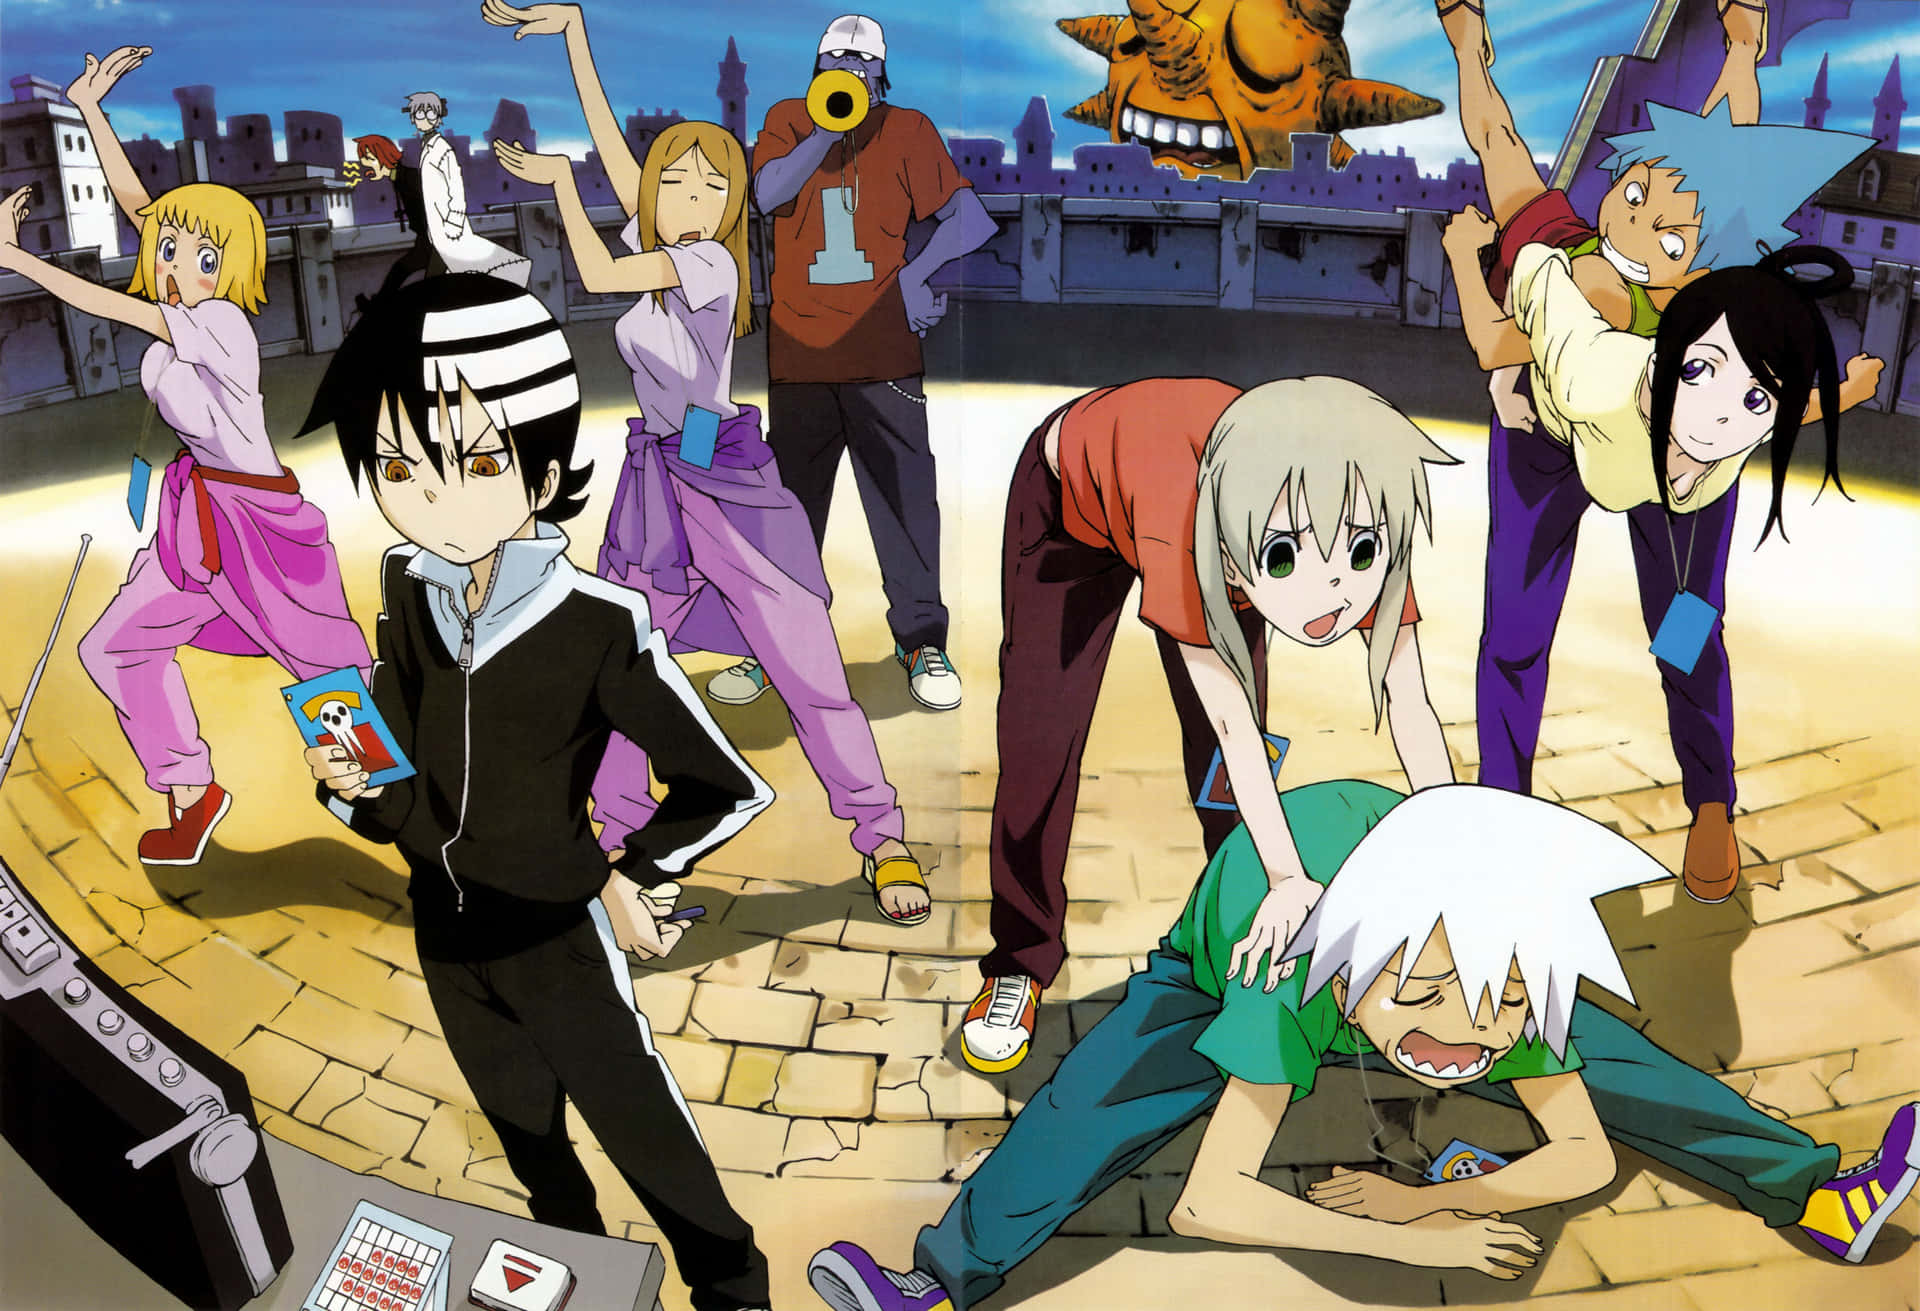 "Harnessing Soul Powers with an Aptitude for War - Soul Eater Manga" Wallpaper